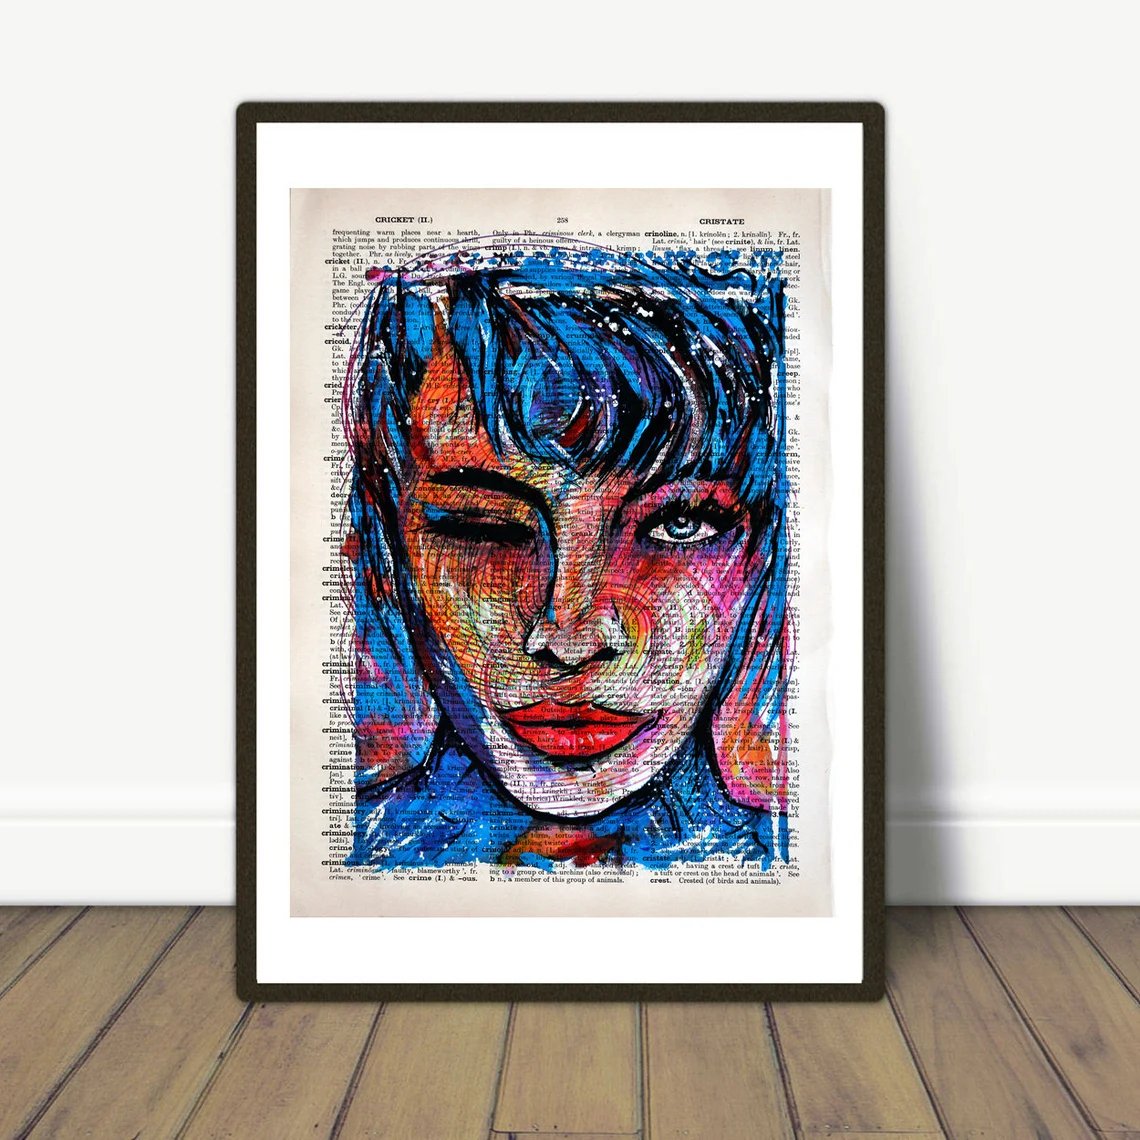 Add a pop of color to your space with our collection of modern art prints! From abstract designs to contemporary styles, we've got something to suit every taste. #ModernArt #ArtPrints #ColorfulDecor #ContemporaryArt #ArtisticExpression 
art4giftvintageart.etsy.com/listing/963692…